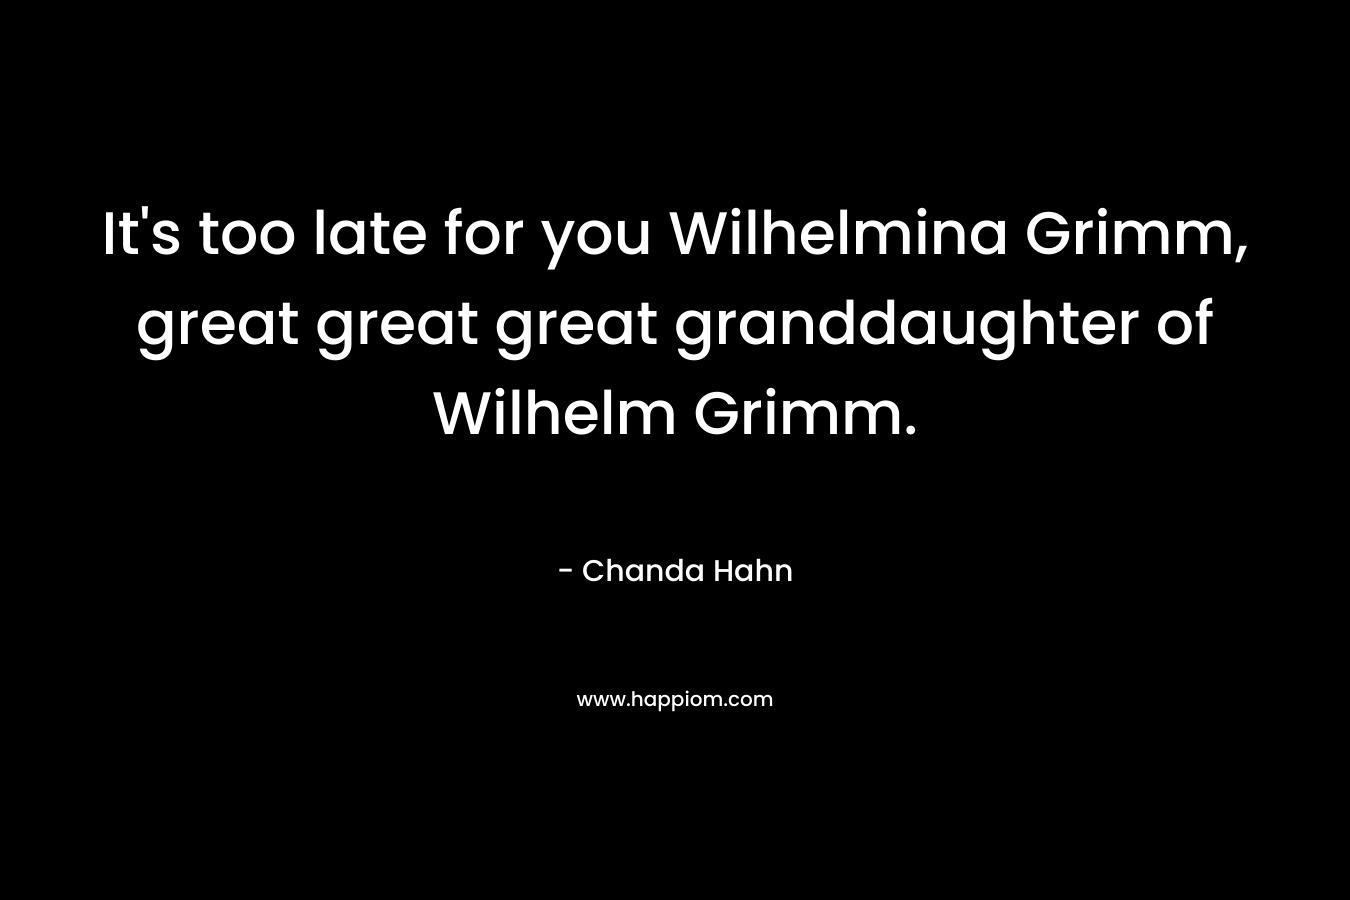 It's too late for you Wilhelmina Grimm, great great great granddaughter of Wilhelm Grimm.